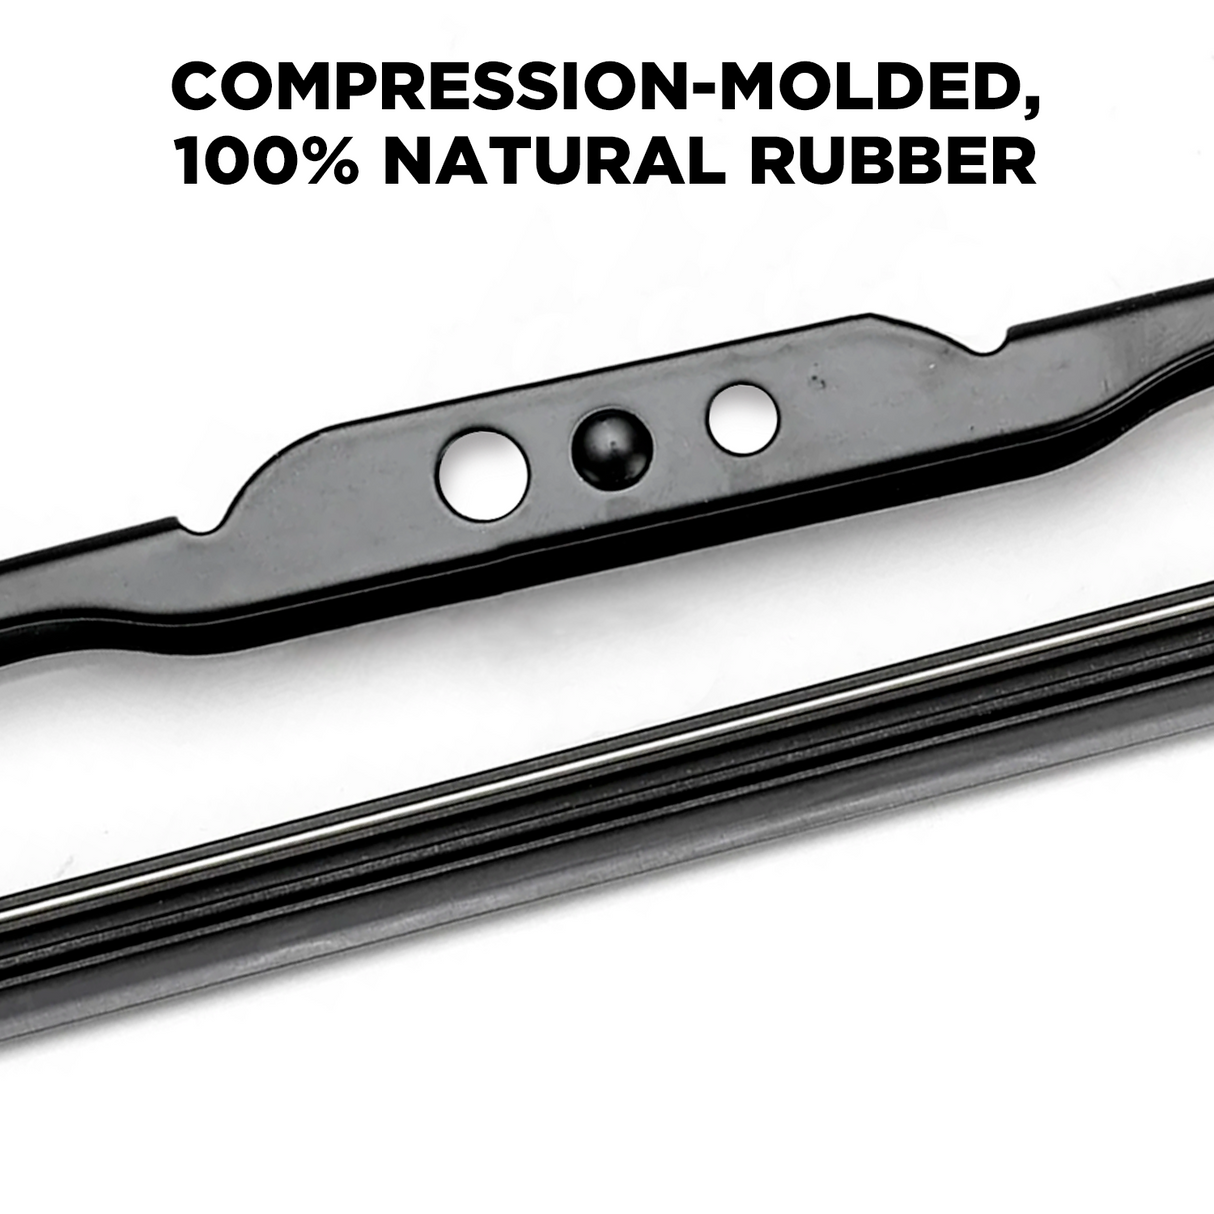 Conventional Windshield Wiper Blade - Pack of 1